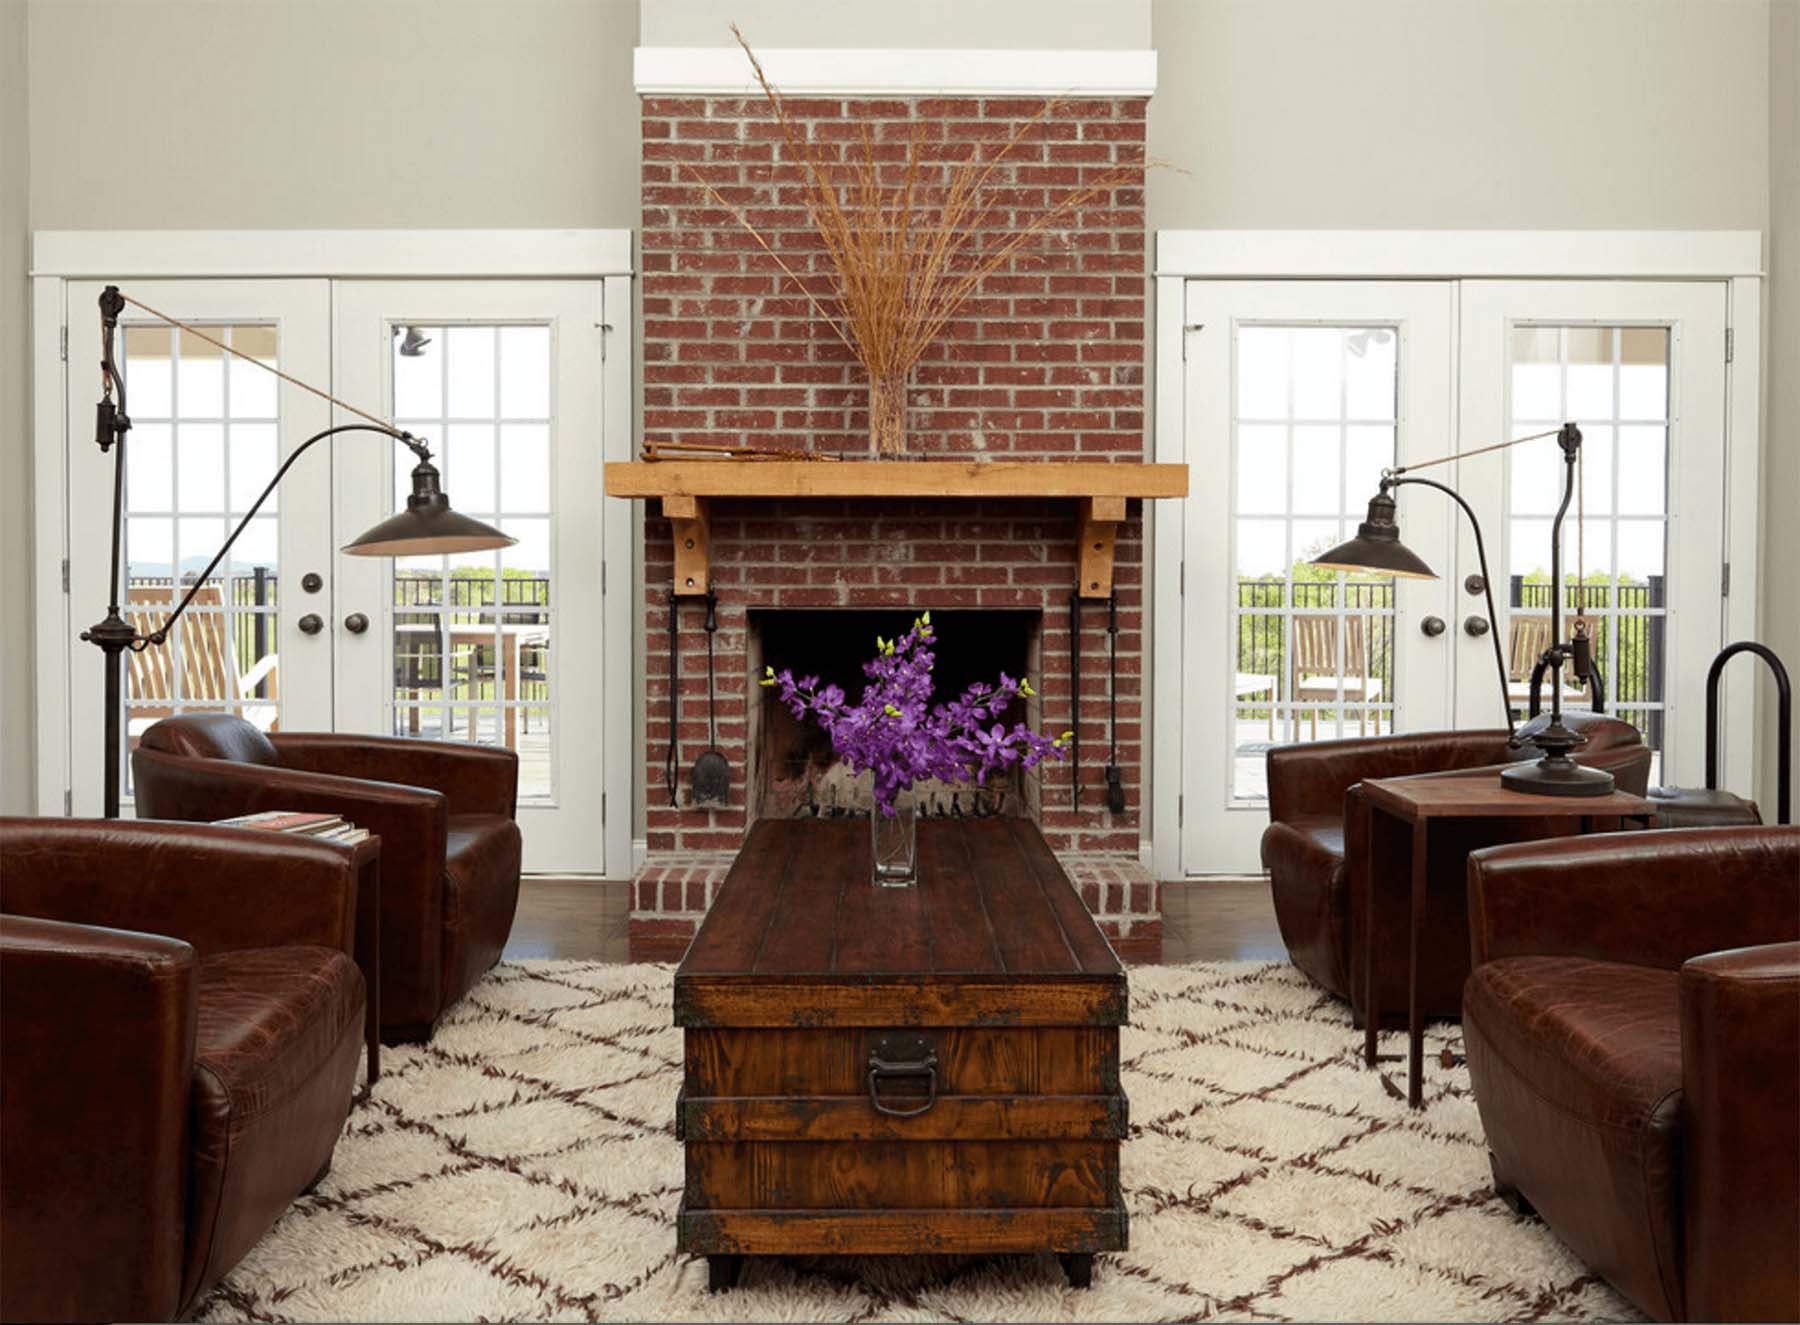 Red Brick Fireplace Ideas Beautiful, How To Make A Red Brick Fireplace Look Better